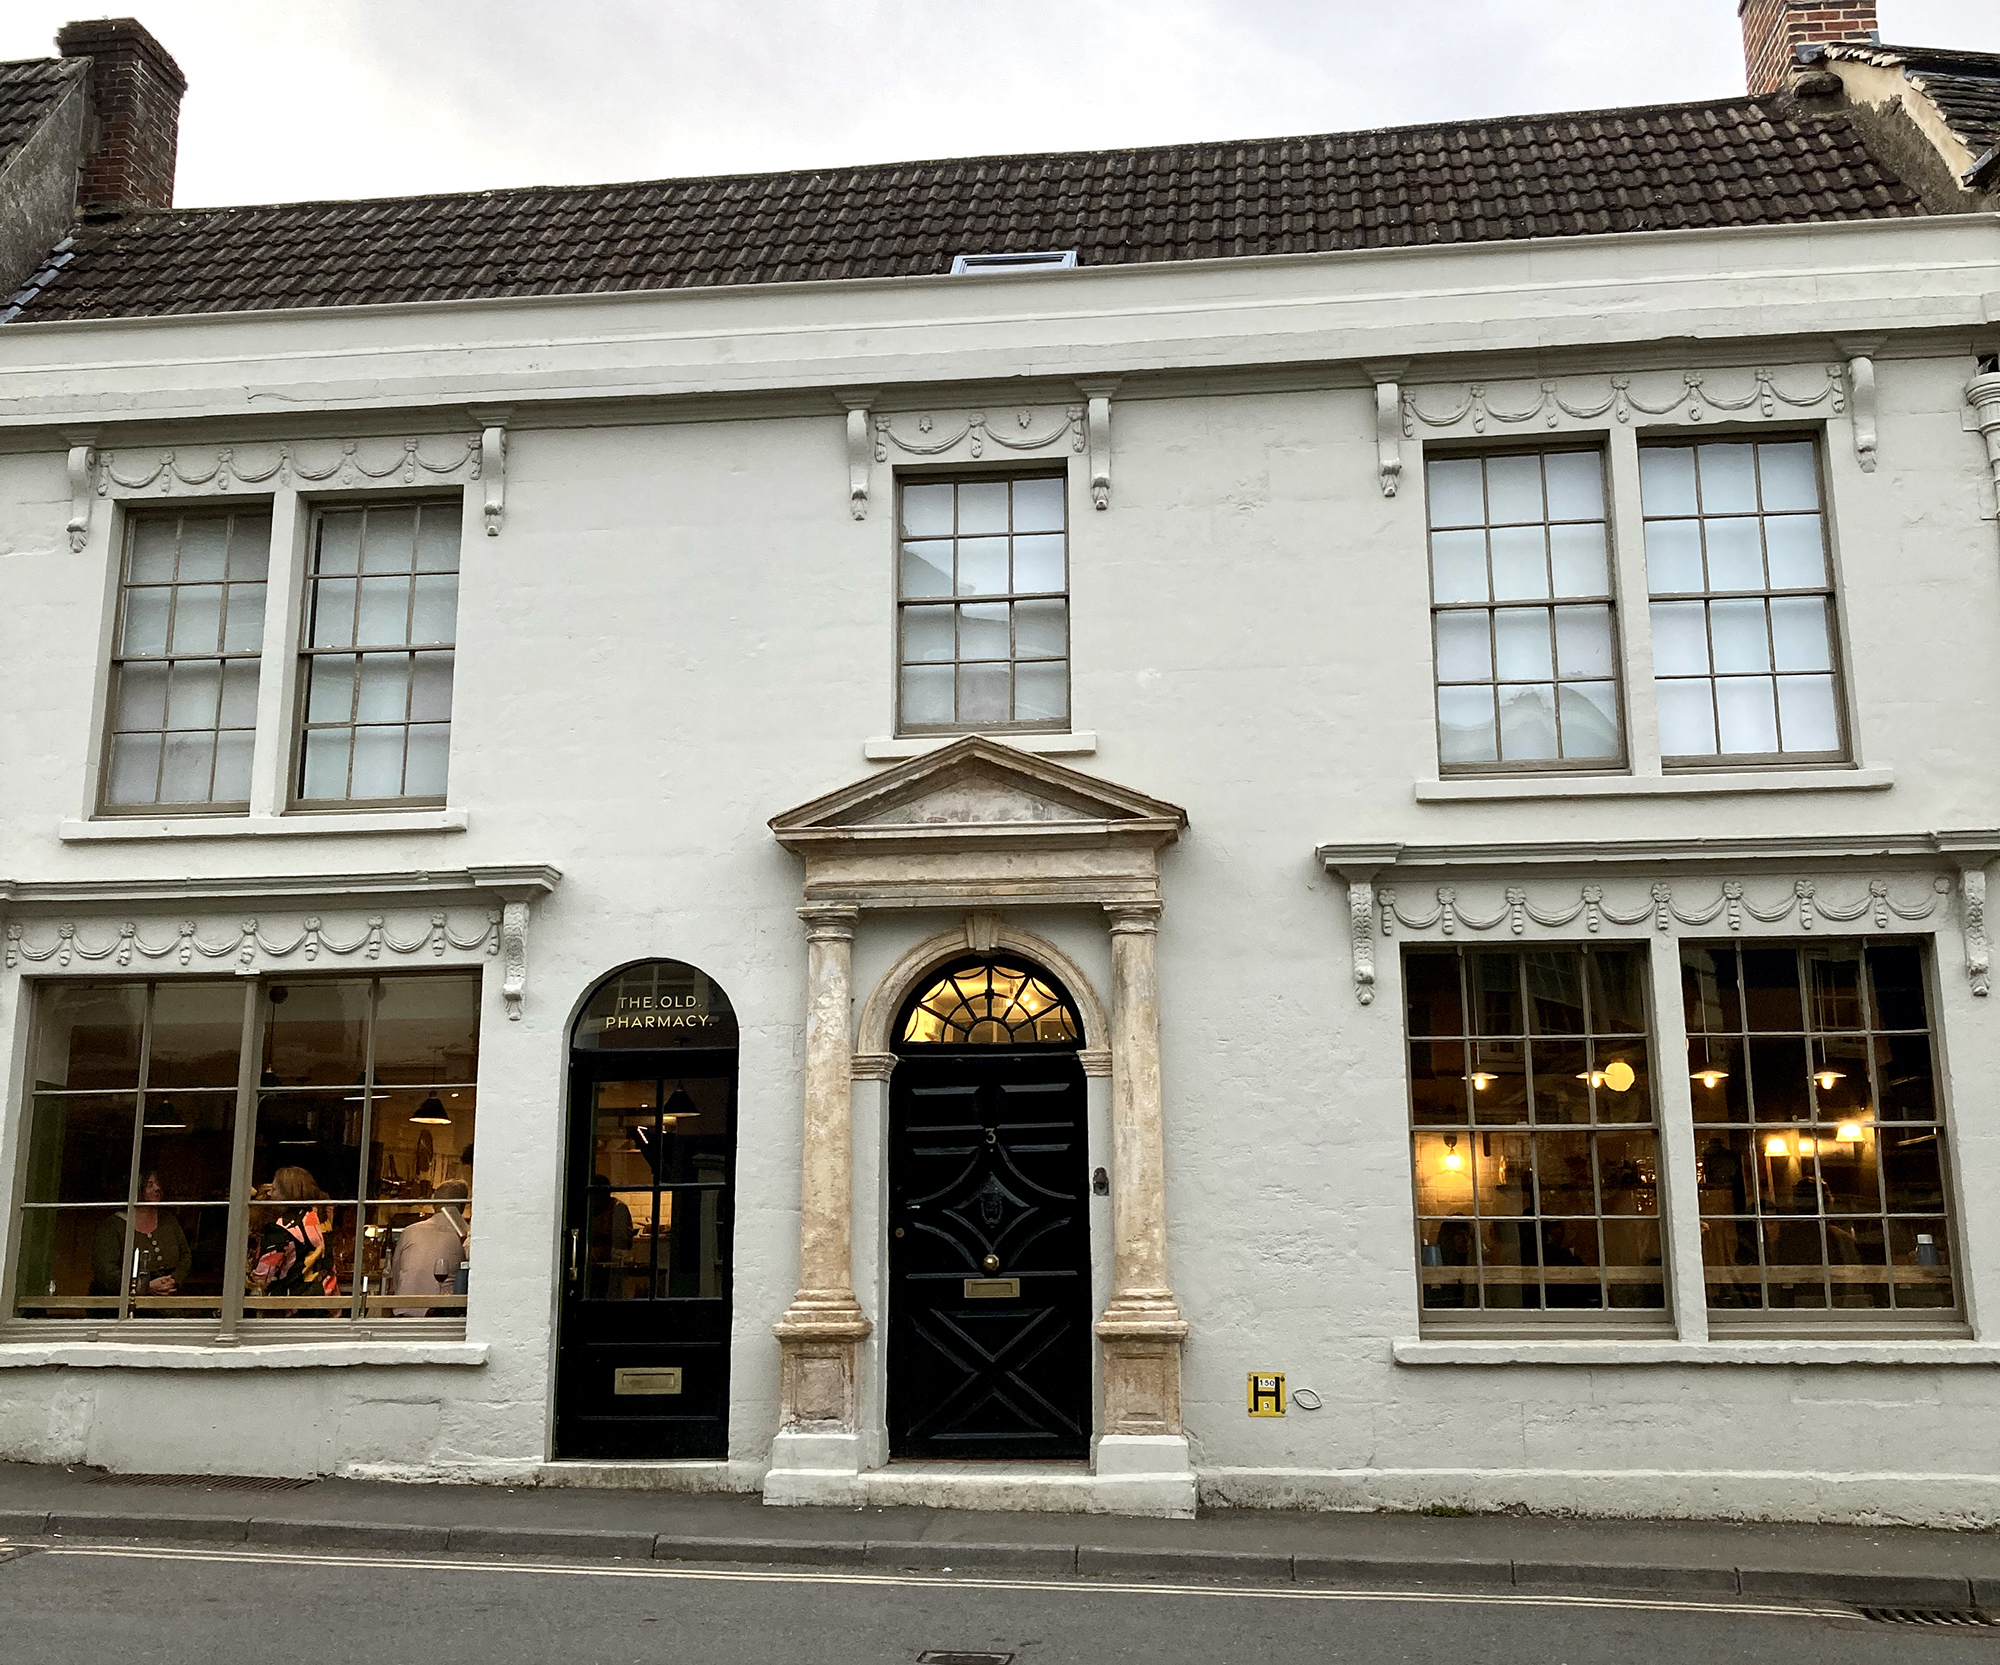 Travel bites: why Bruton is the perfect overnight stop